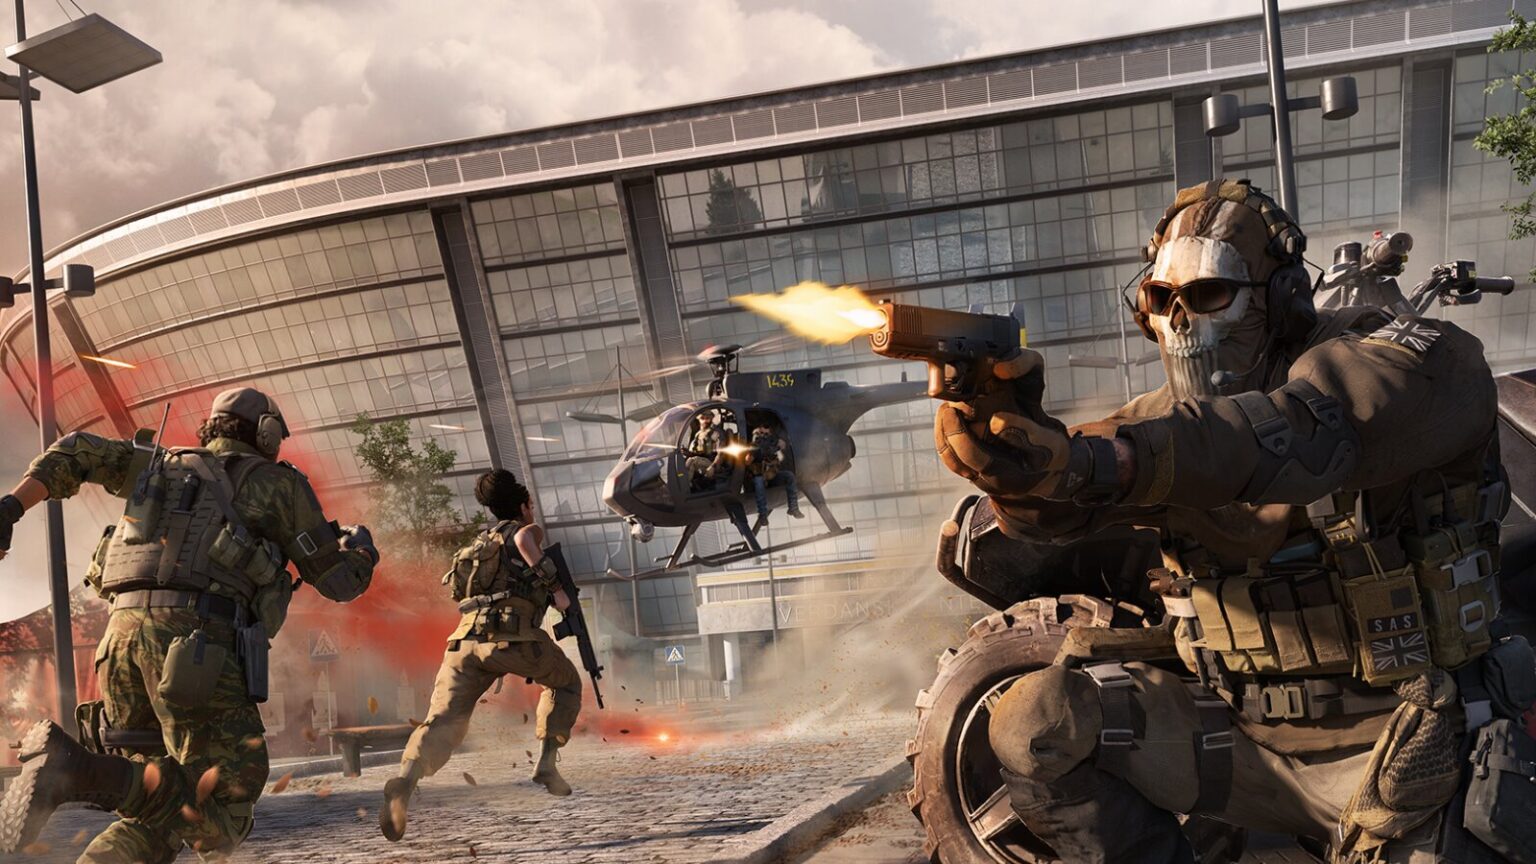 2024's best mobile game features intense combat with helicopters and soldiers